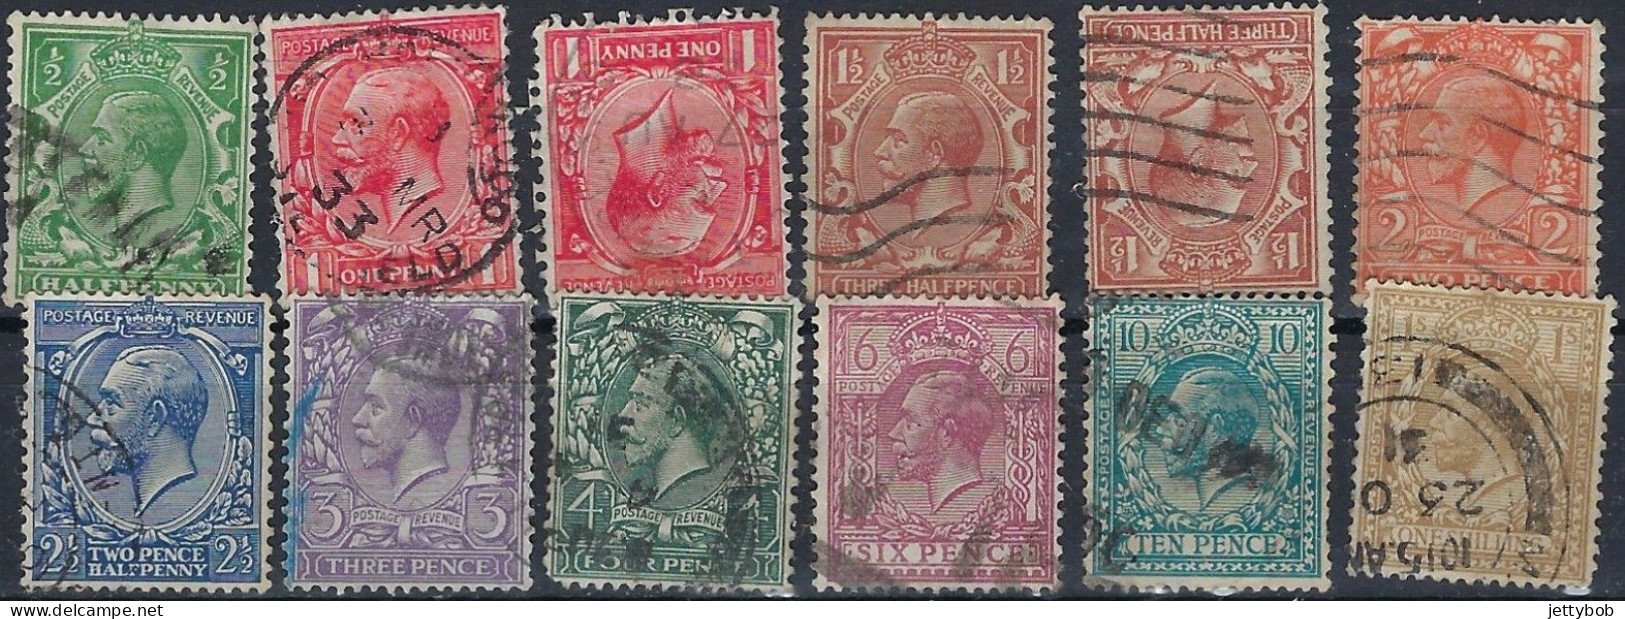 GB 1924 GV Definitives Wmk: Block Cypher 10 Values + 2 Inverted Watermarks Used - Oblitérés